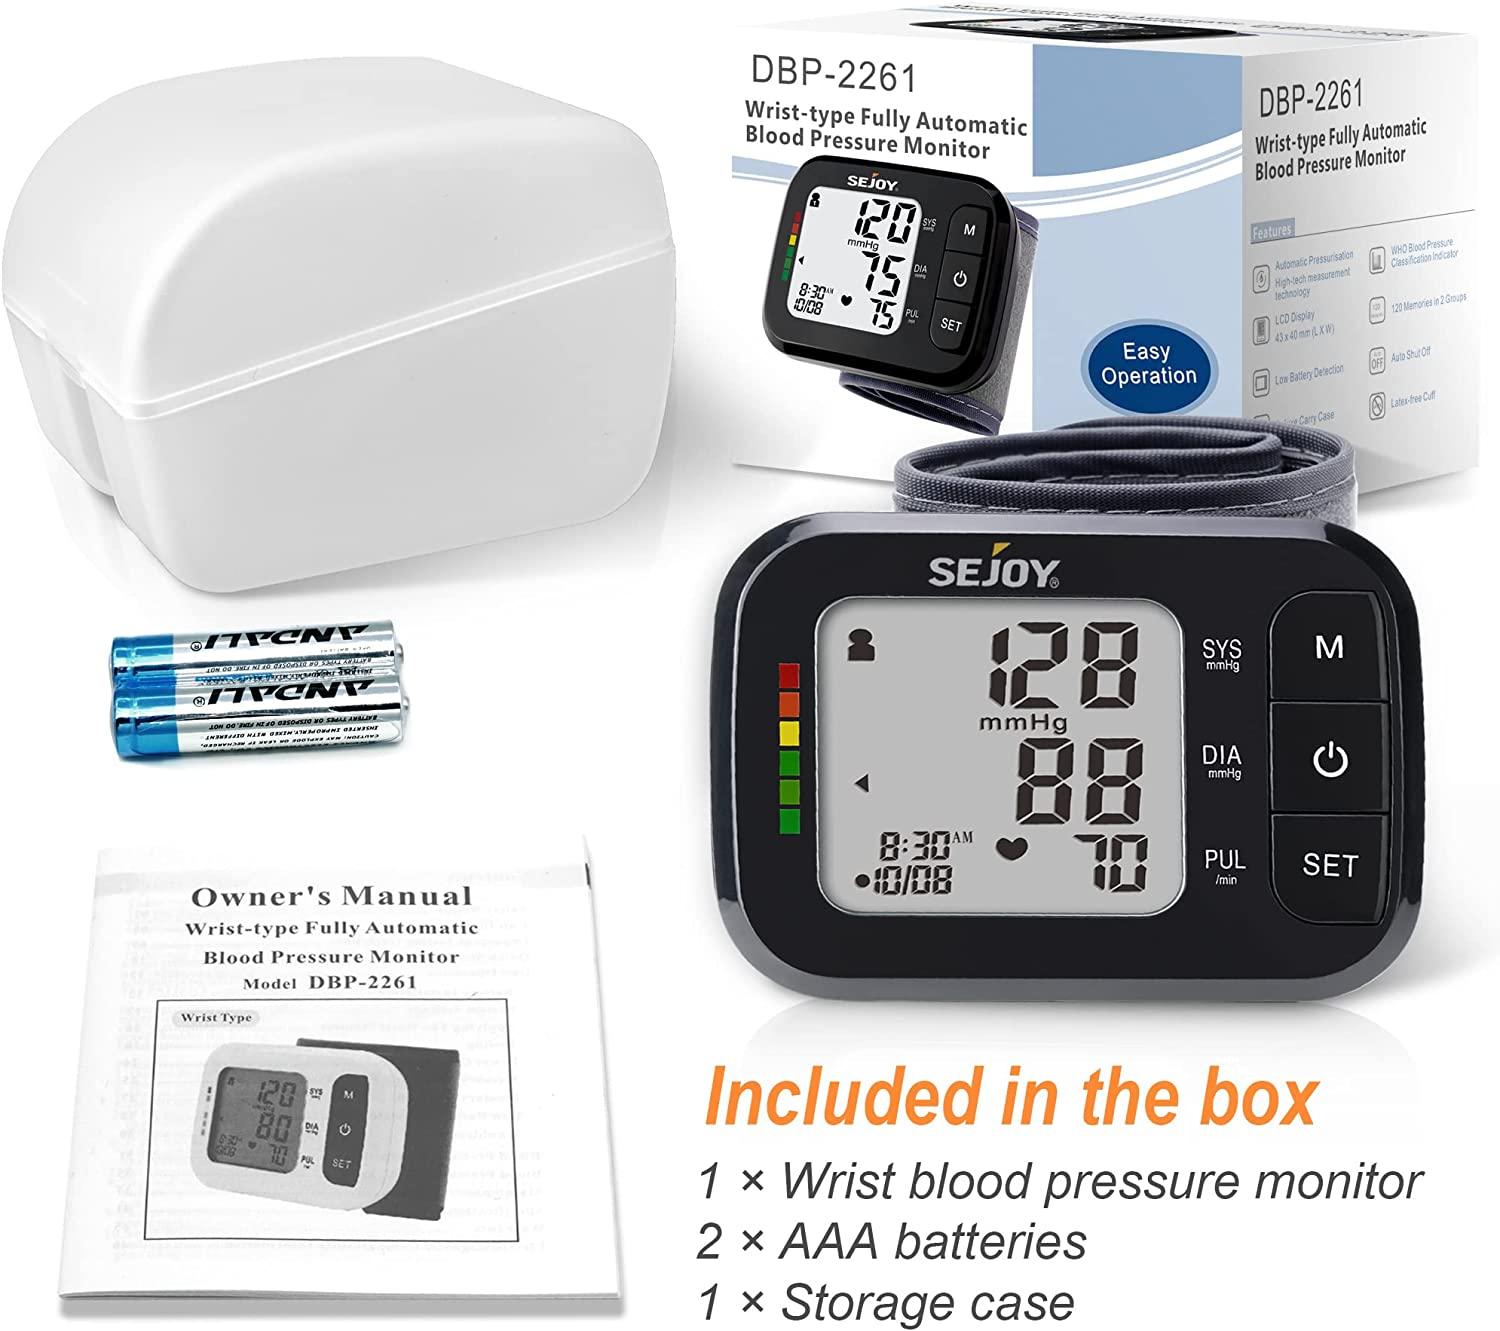 iHealth Push Wrist Blood Pressure Monitor, Digital Bluetooth Blood Pressure  Machine with Large Display and Portable Carrying Case for at Home and